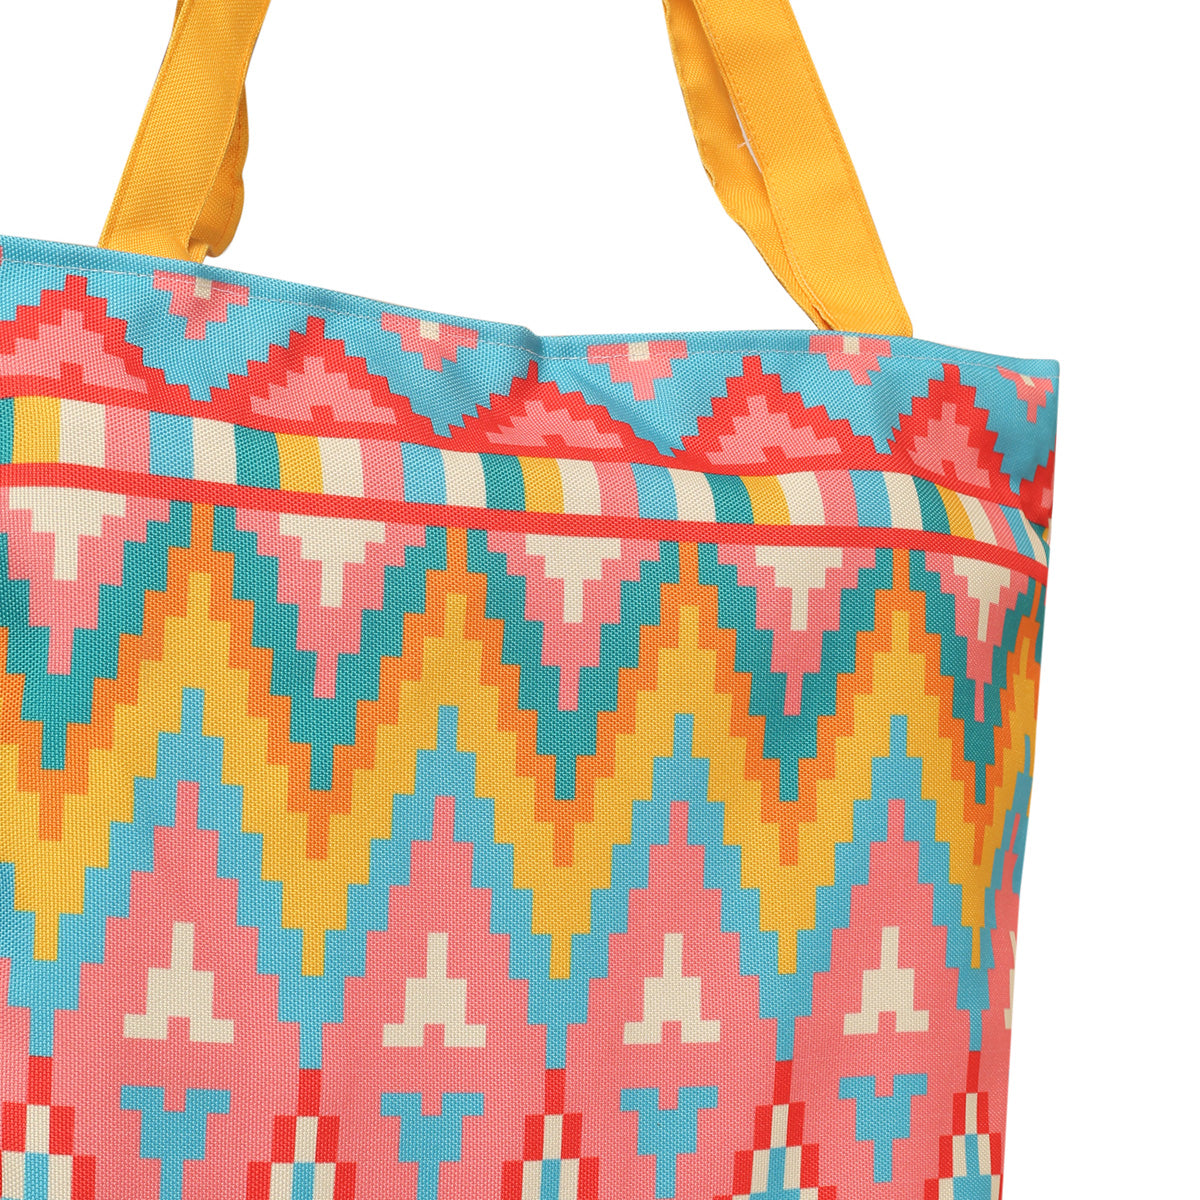 Colorful tote bag with geometric pattern